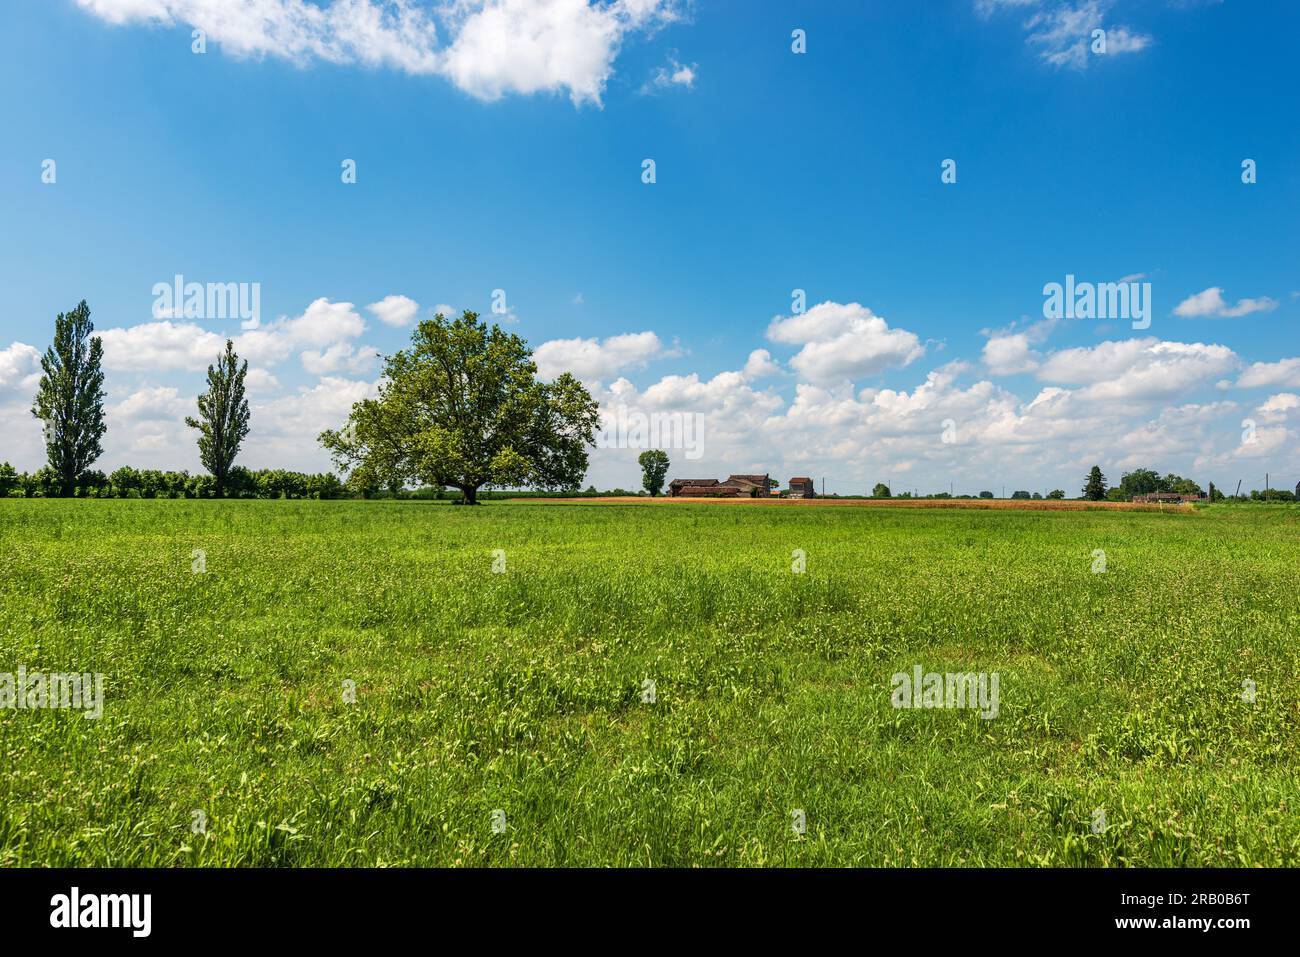 Rural landscape with green meadow and a large tree in springtime, Padan Plain or Po valley (Pianura Padana, Italian). Mantua province, Lombardy, Italy Stock Photo